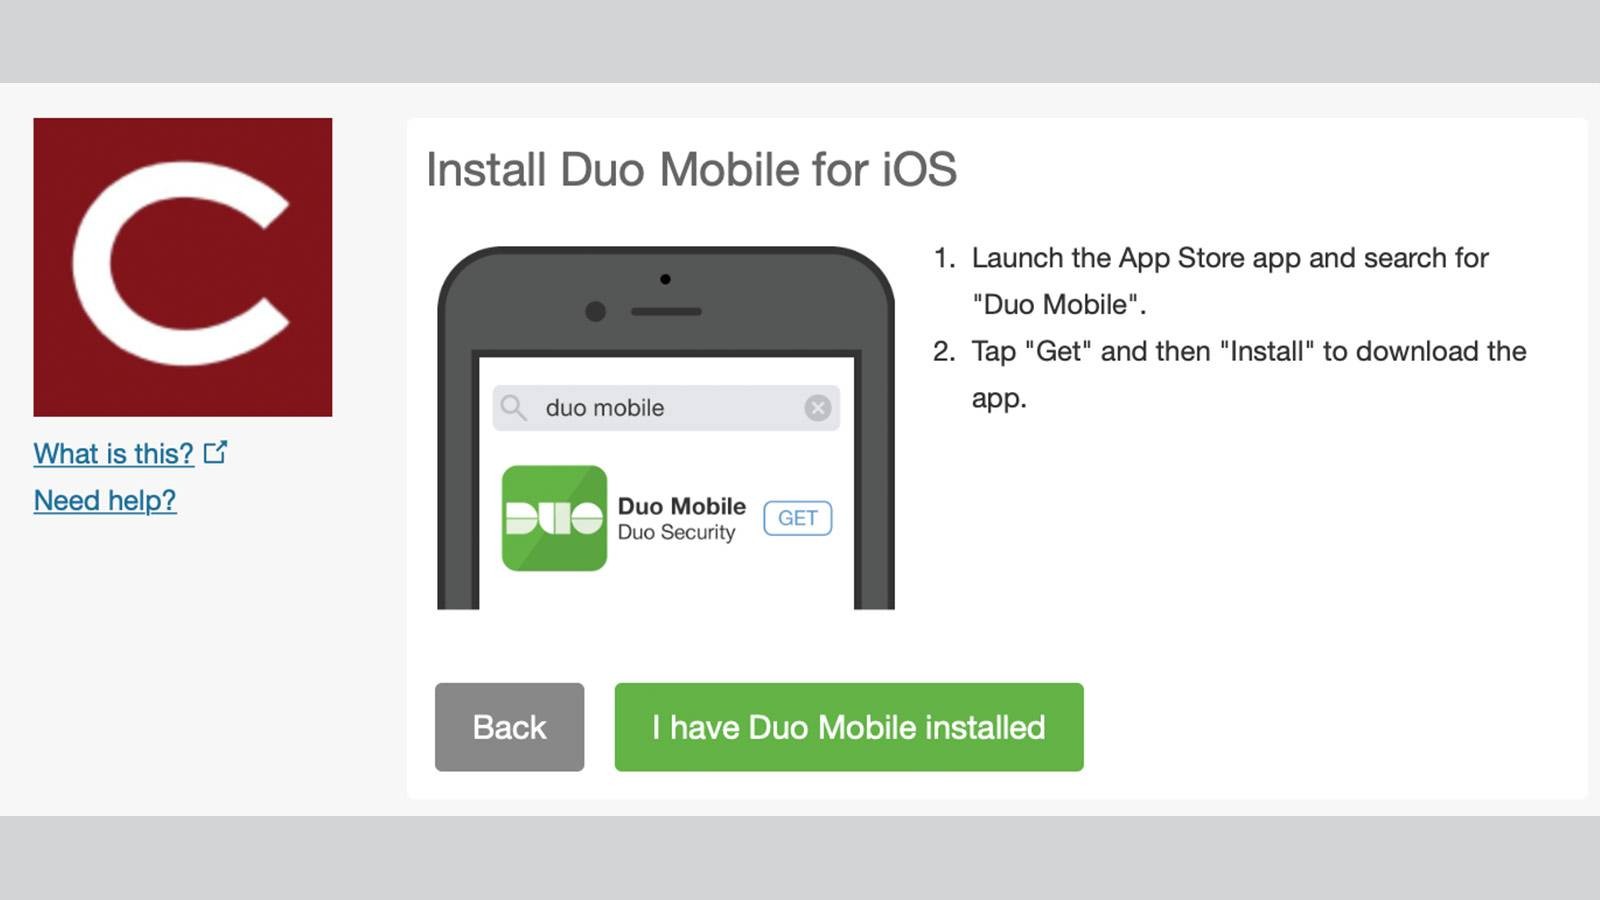 Install Duo Mobile for iOS